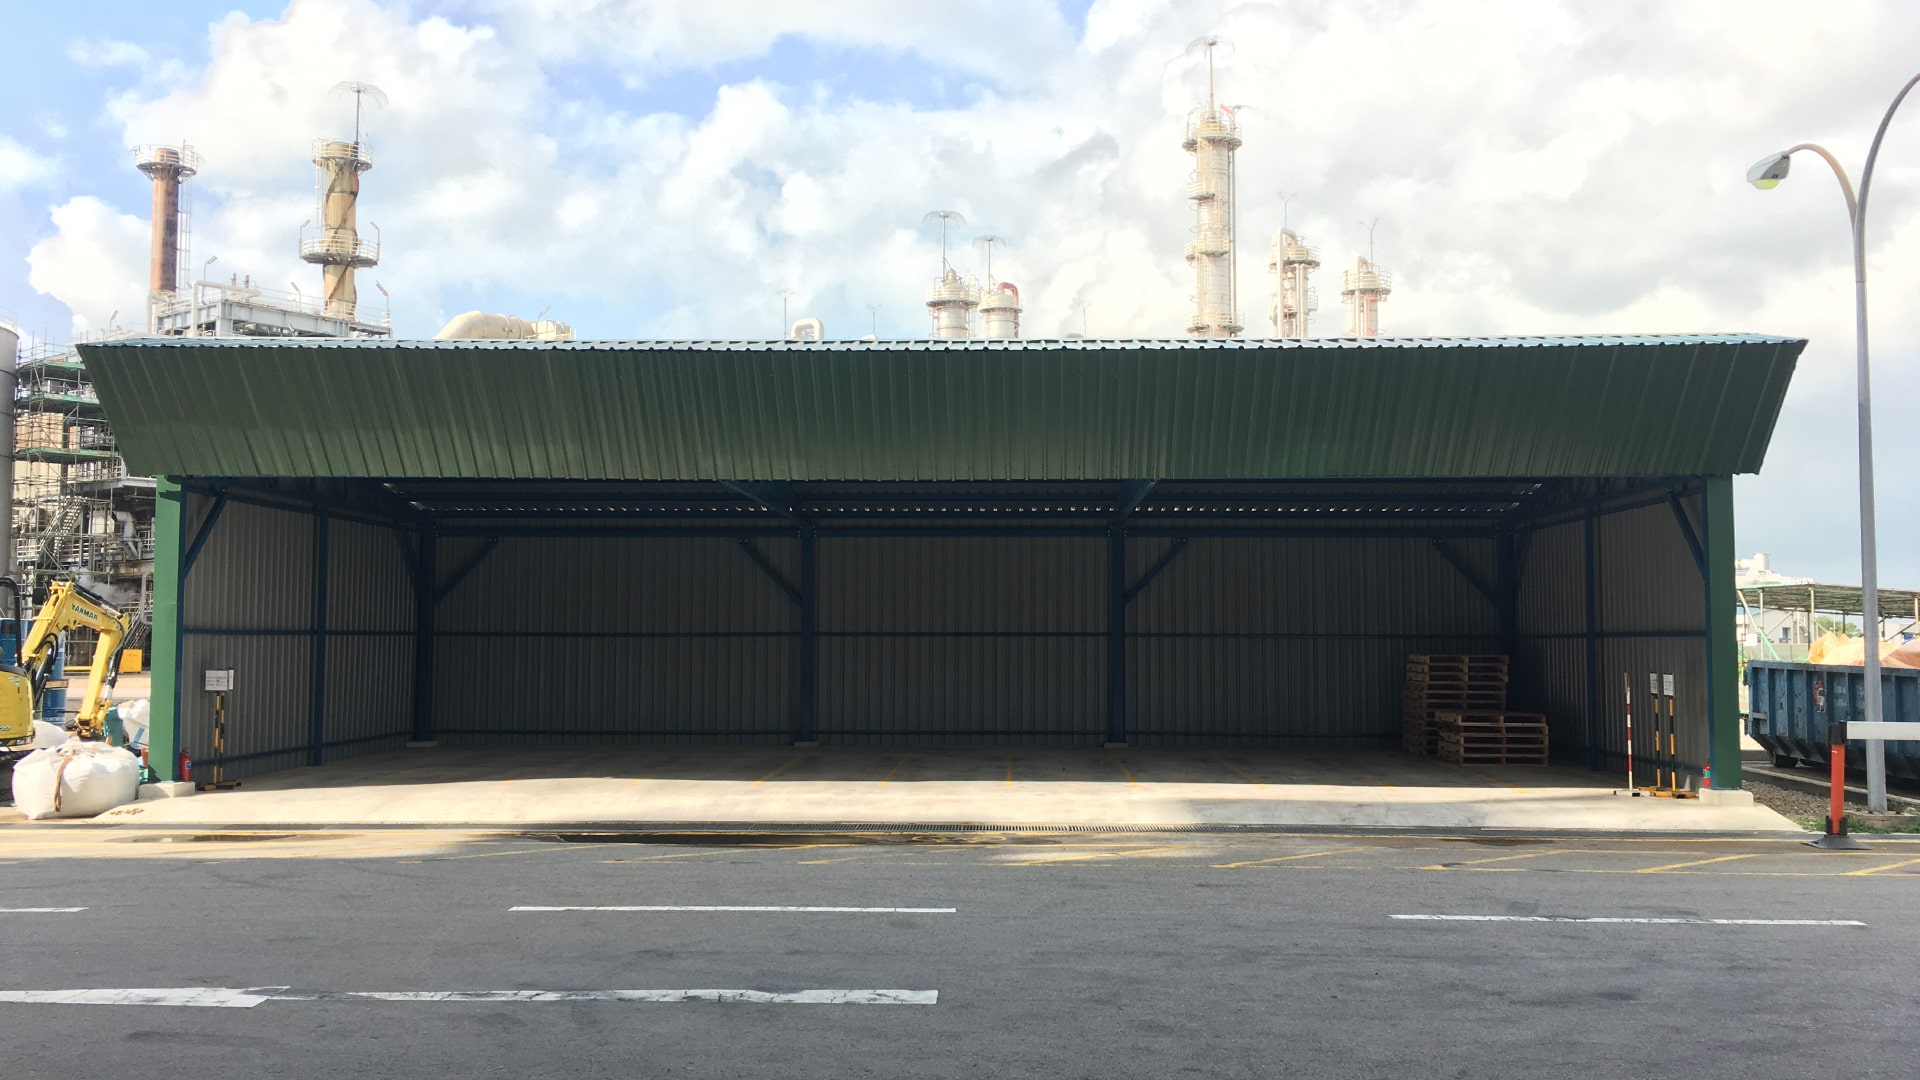 tsc_opt-images_steel-structures_mps-pallet-shed-1920x1080-02-min